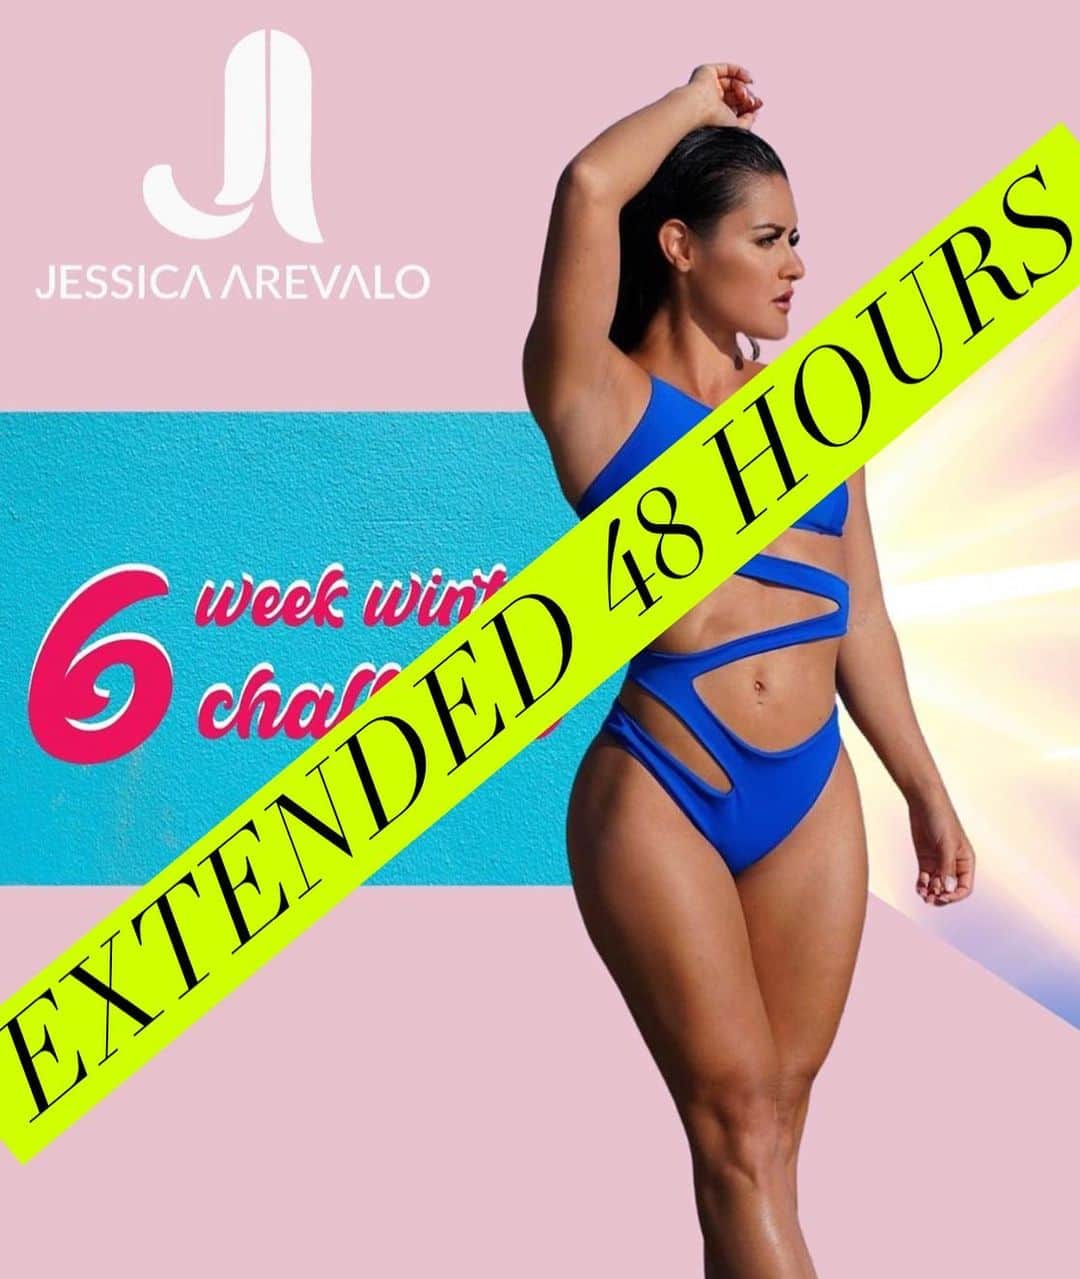 Jessica Arevaloのインスタグラム：「MY 6 WEEK WINTER CHALLENGE ENROLLMENT HAS BEEN EXTENDED 48 HRS! 😍  💥IF YOU ARE LOOKING TO TONE UP, LOSE FAT OR LEARN MY WAYS THIS CHALLENGE IS FOR YOU!💥 - Open enrollment is through Dec 13 & the challenge starts Dec 14! DON’T WAIT!🙌🏼 - 🔺My 6 Week Winter is challenge is just $99!!!  🔺This program includes: - 🔺BOTH GYM/HOME WORKOUTS  - 🔺Over $6k in cash prizes - 🔺One on One Coaching with me - 🔺Weekly Check ins - 🔺Workout Program +Macros/Meal Plans + Cardio Regimen  - 🔺Private Facebook Group and more! - 🔺WORLDWIDE ENTRY  - 🔺 FOR WOMEN & MEN  - CHECK OUT LINK IN BIO TO SIGN UP!👆🏼If you have any question please feel free to DM me directly!📩」